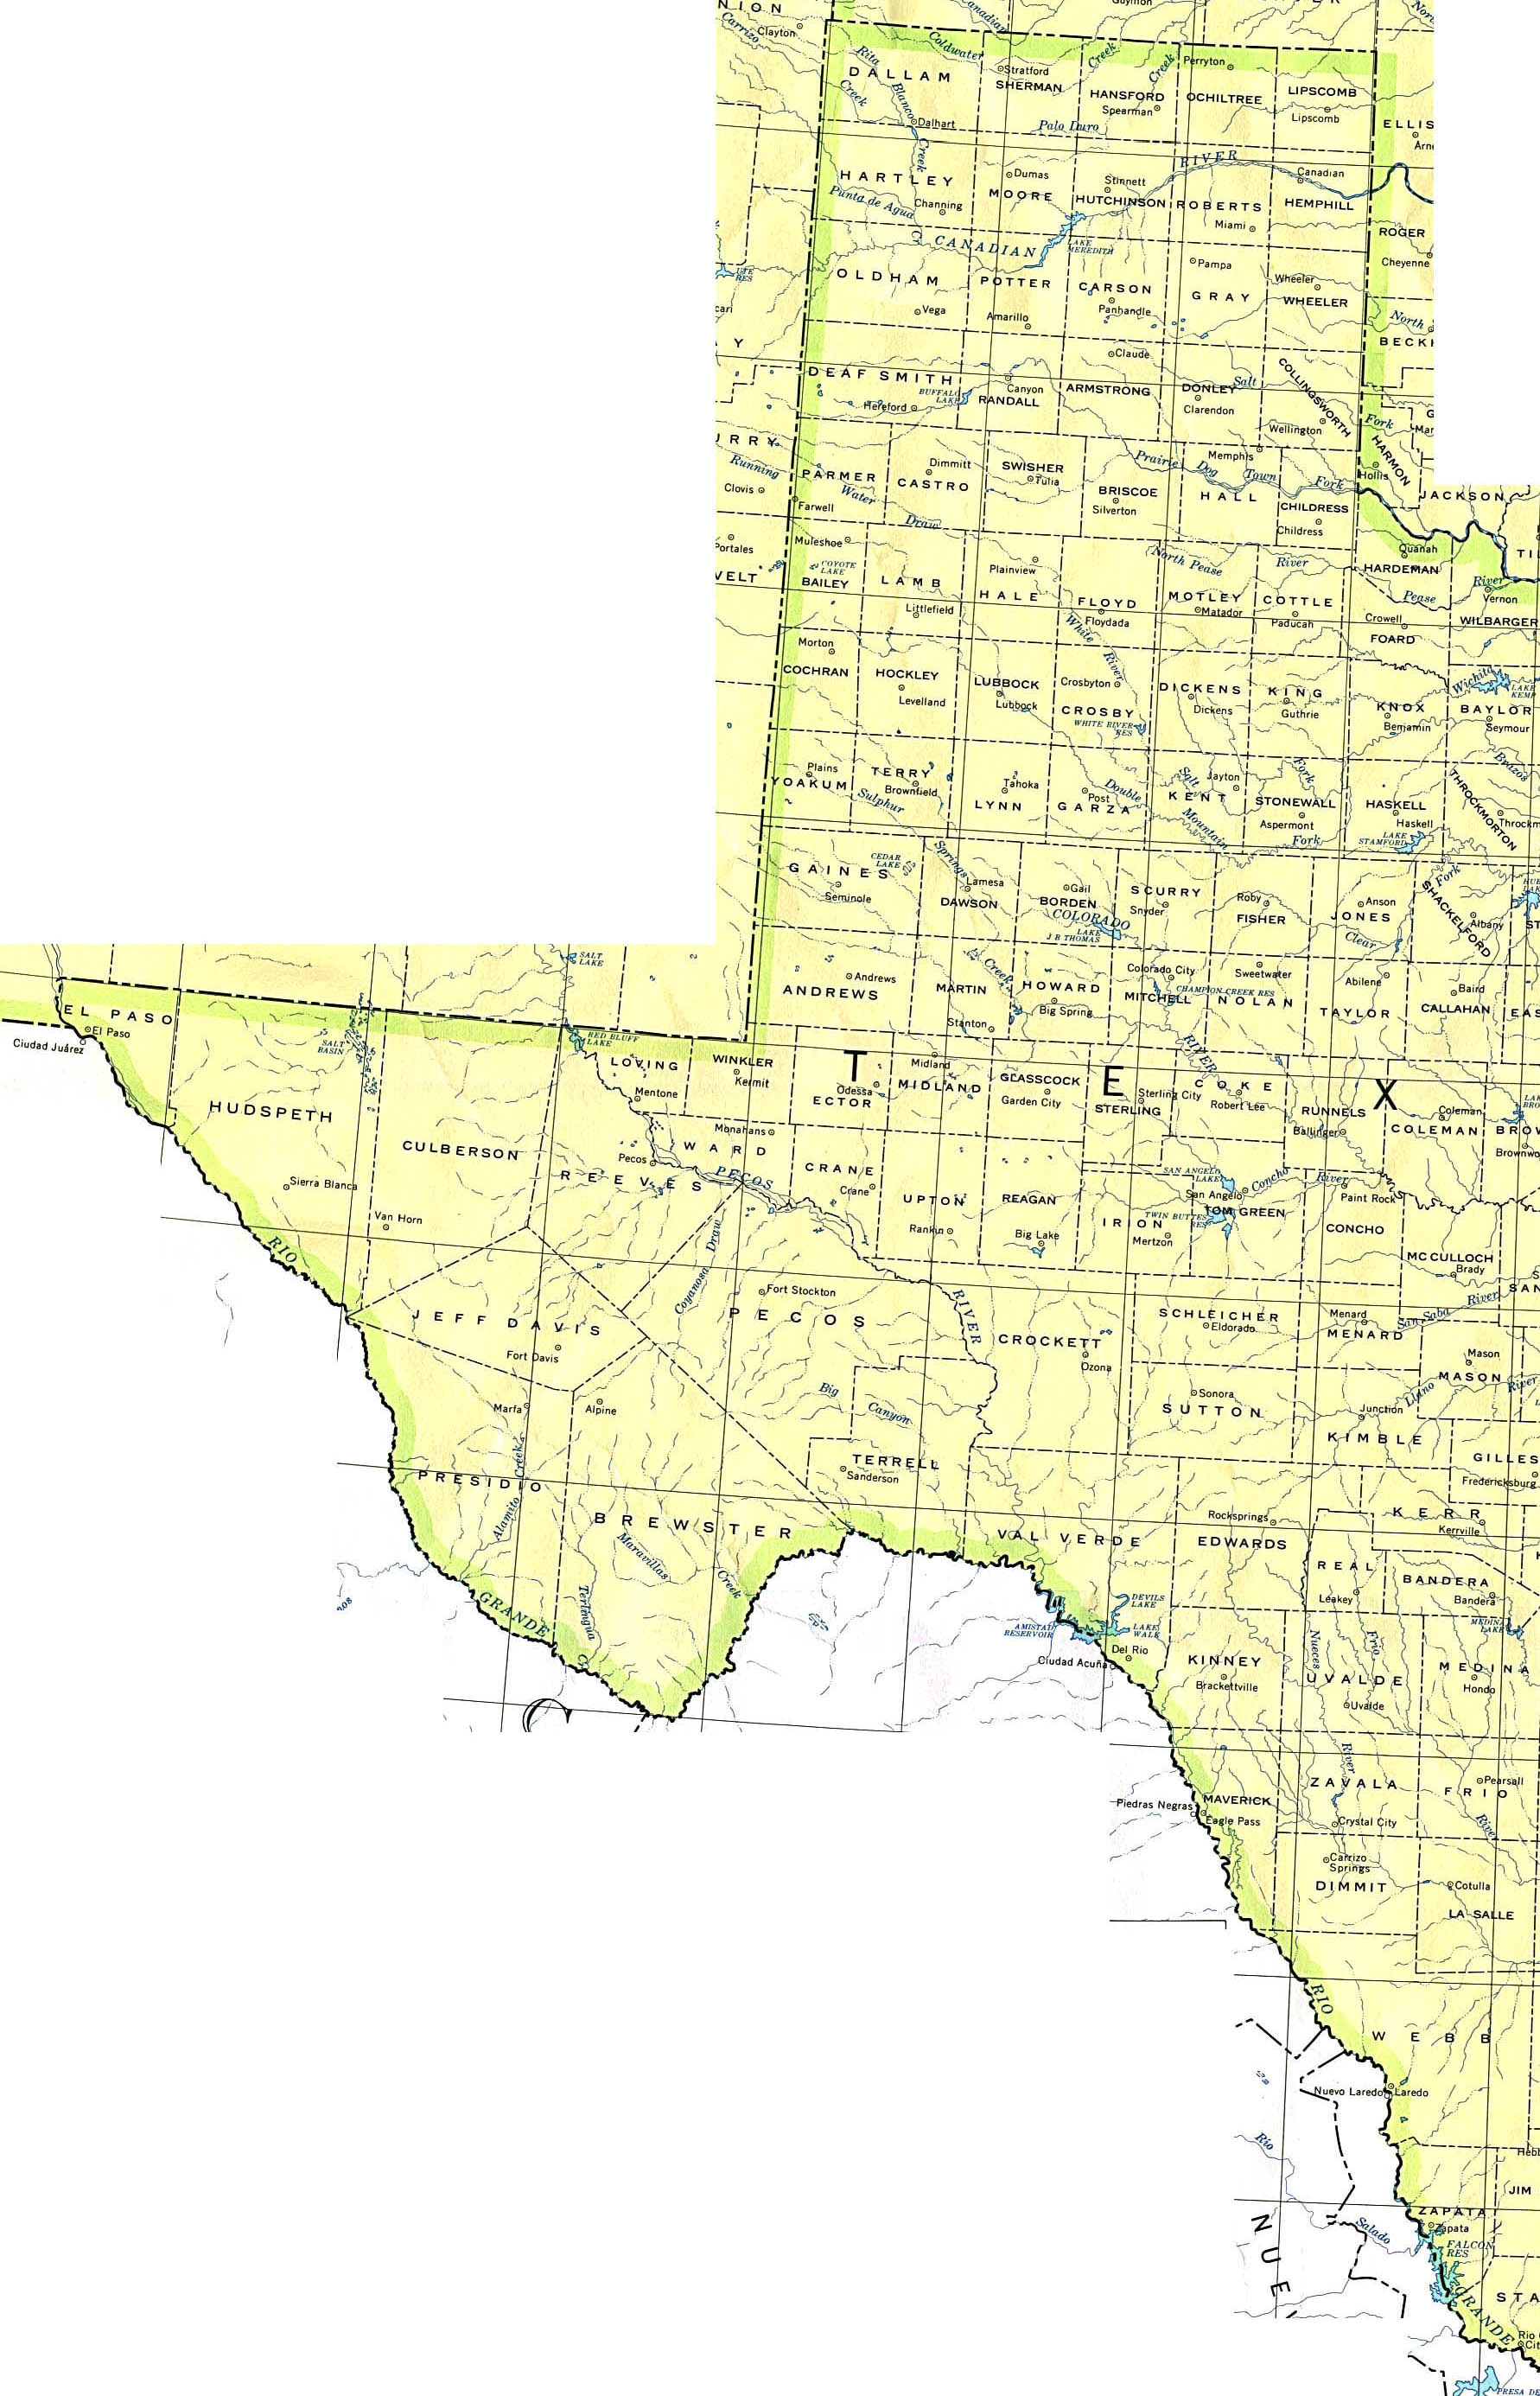 Texas Maps - Perry-Castañeda Map Collection - Ut Library Online - Usda Loan Map Texas